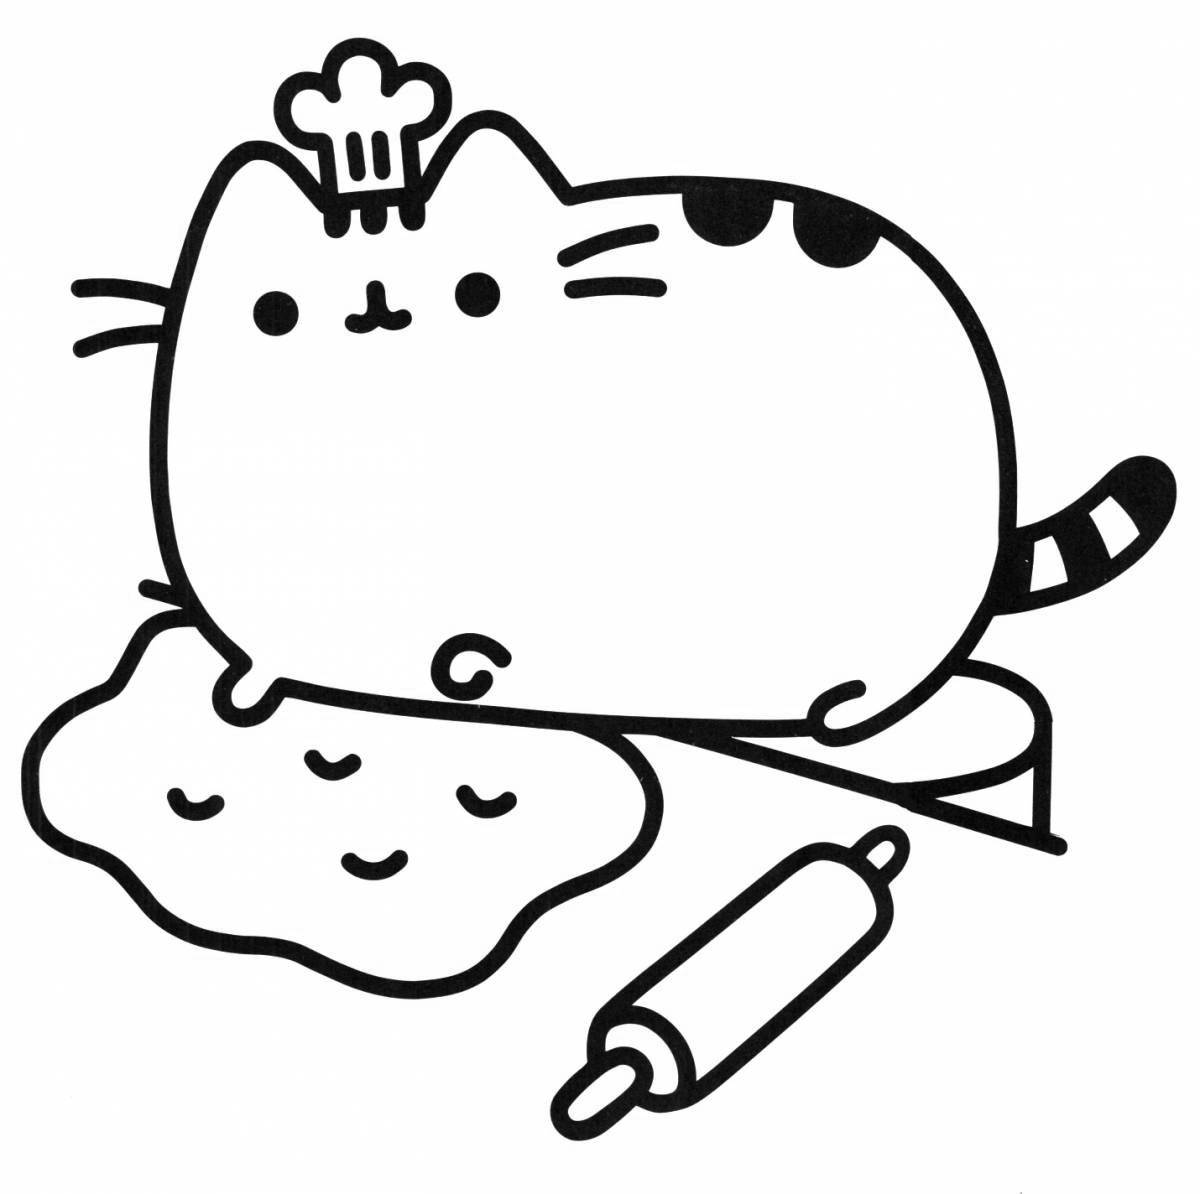 Coloring book chubby fat cat